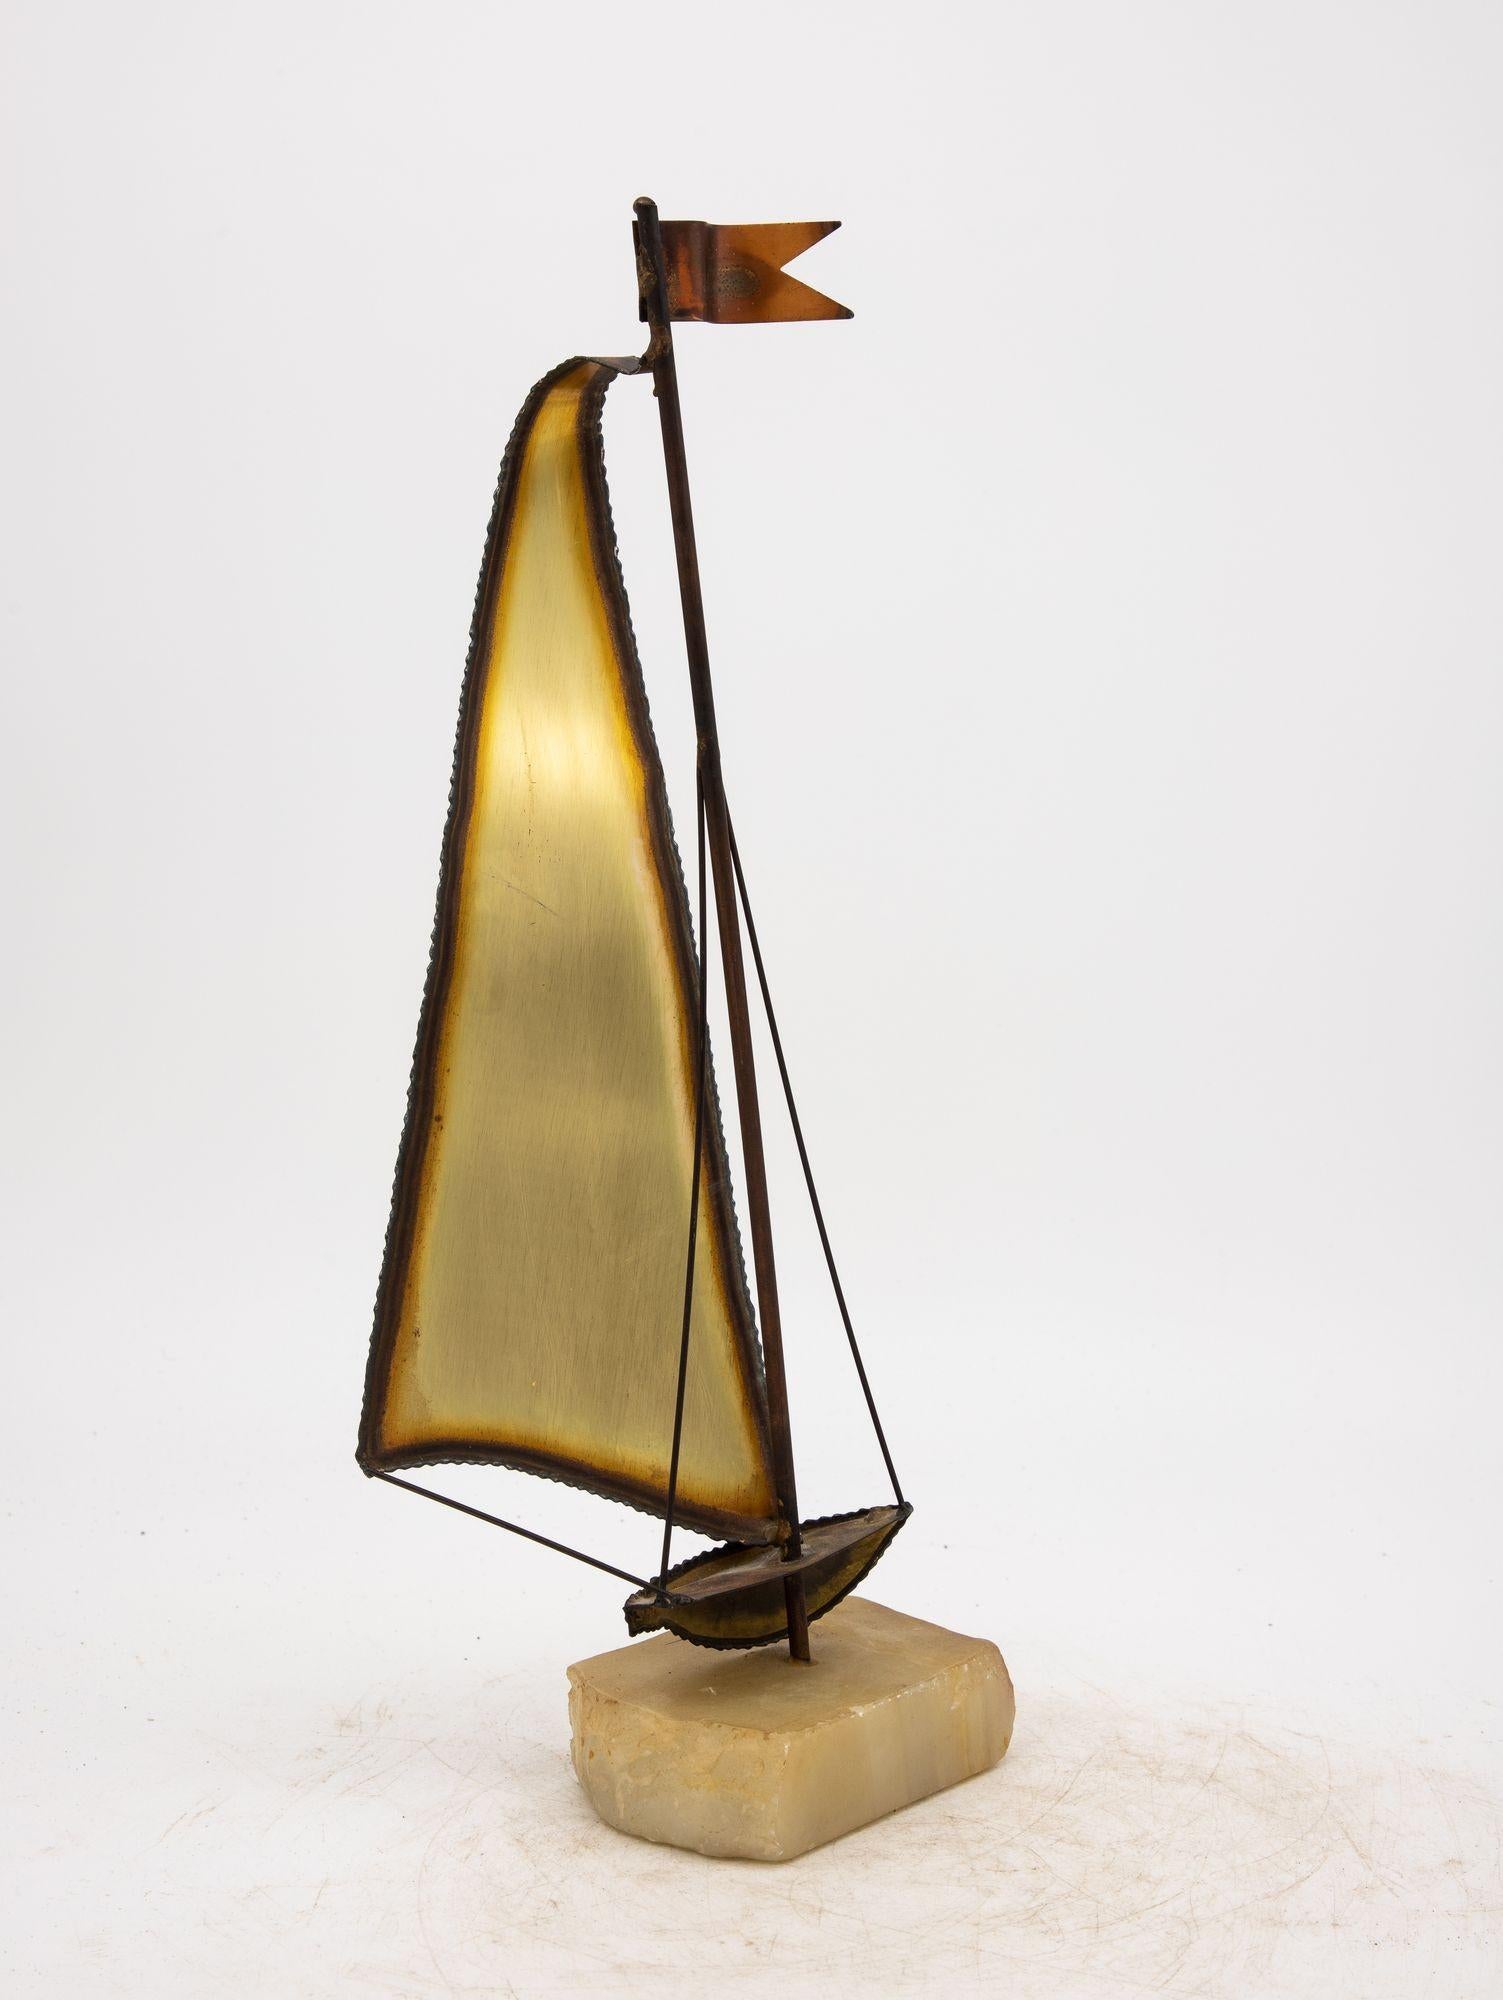 Vintage Brutalist Style Brass Sailboat on Onyx Base, Signed by Demott, 20th C In Good Condition For Sale In South Salem, NY